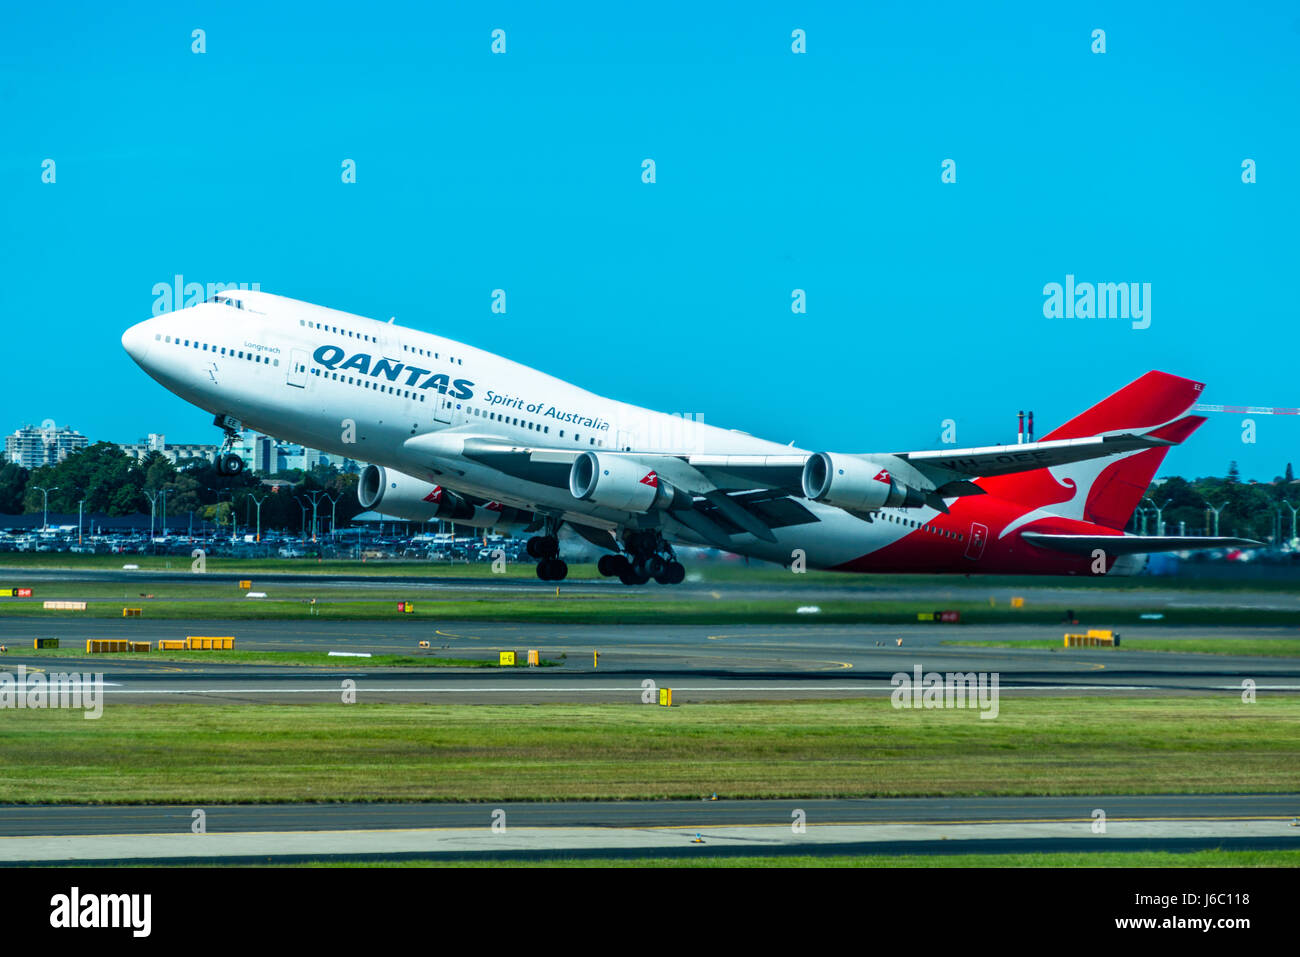 A Qantas jumbo jet taking off from Sydney Airport. New South Wales, Australia. Stock Photo